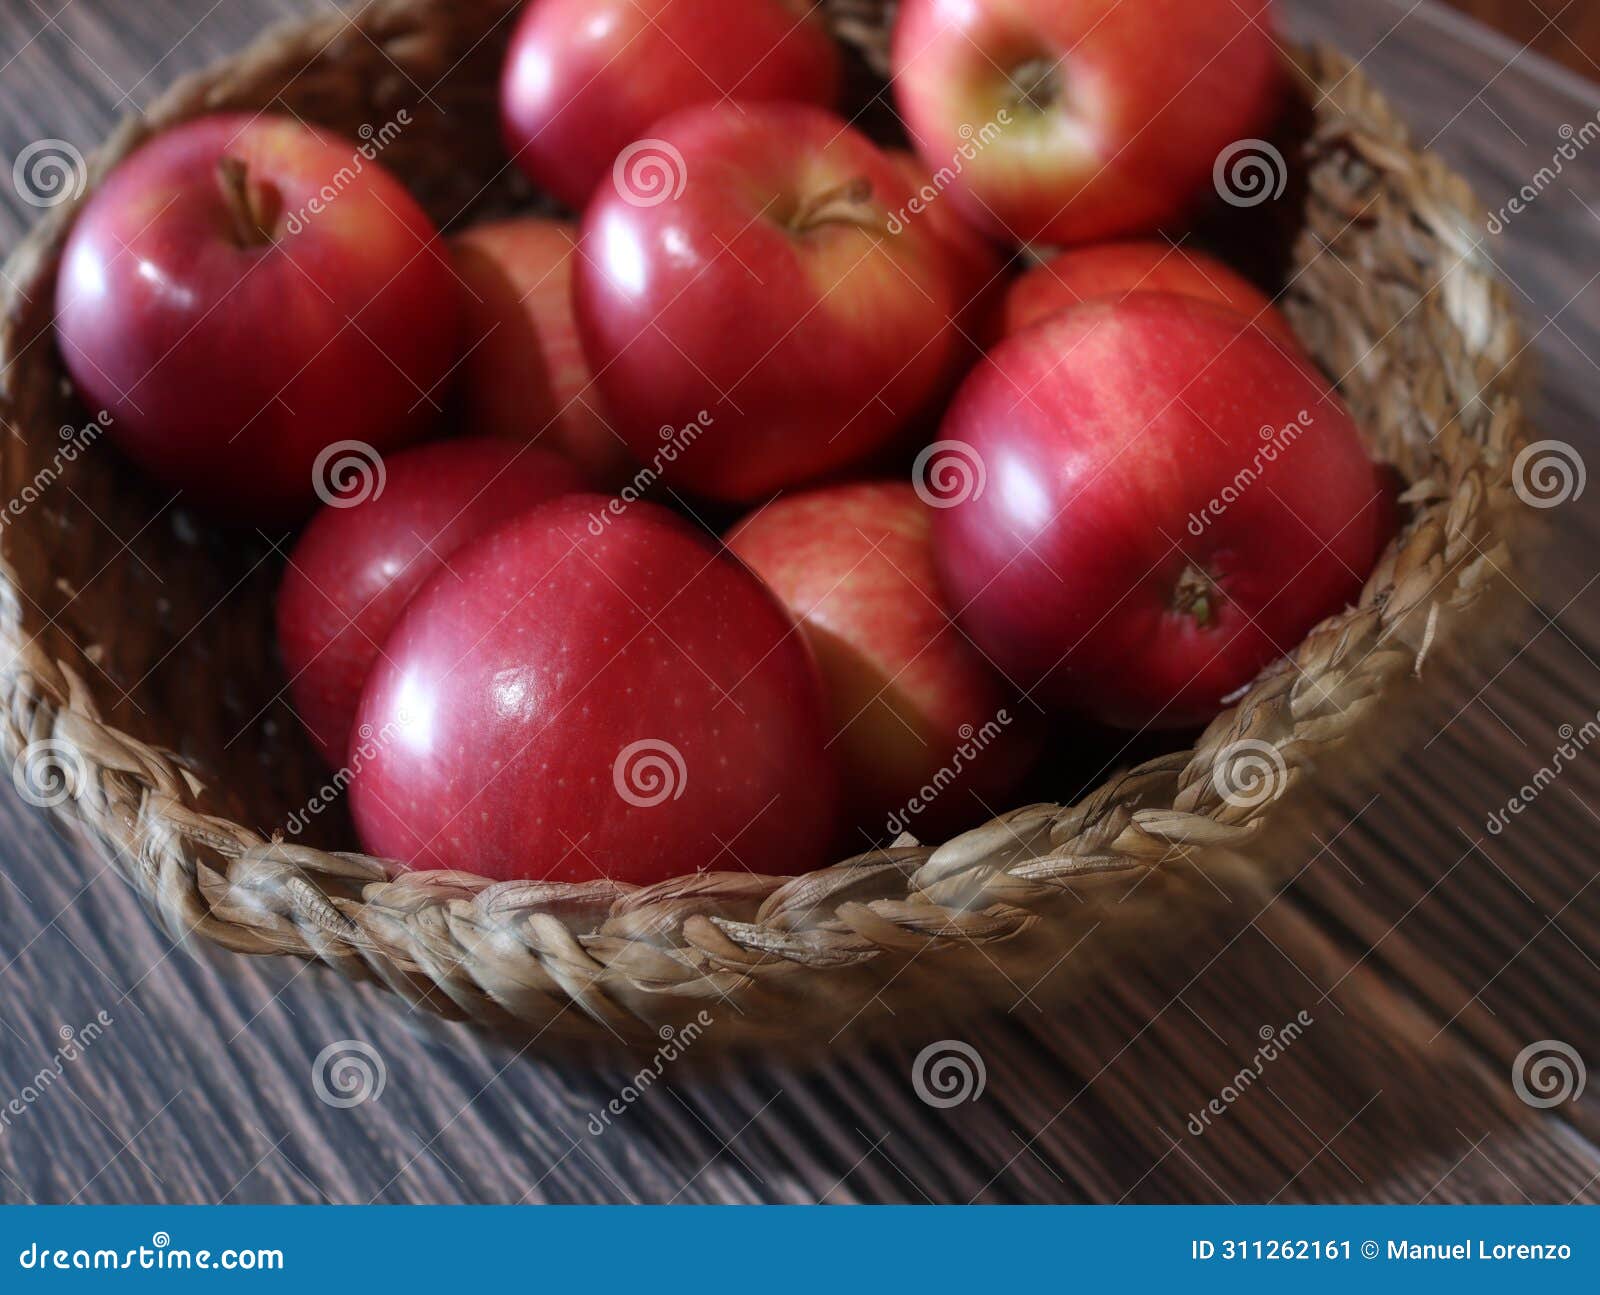 delicious appetizing red apples natural fruit delicacy